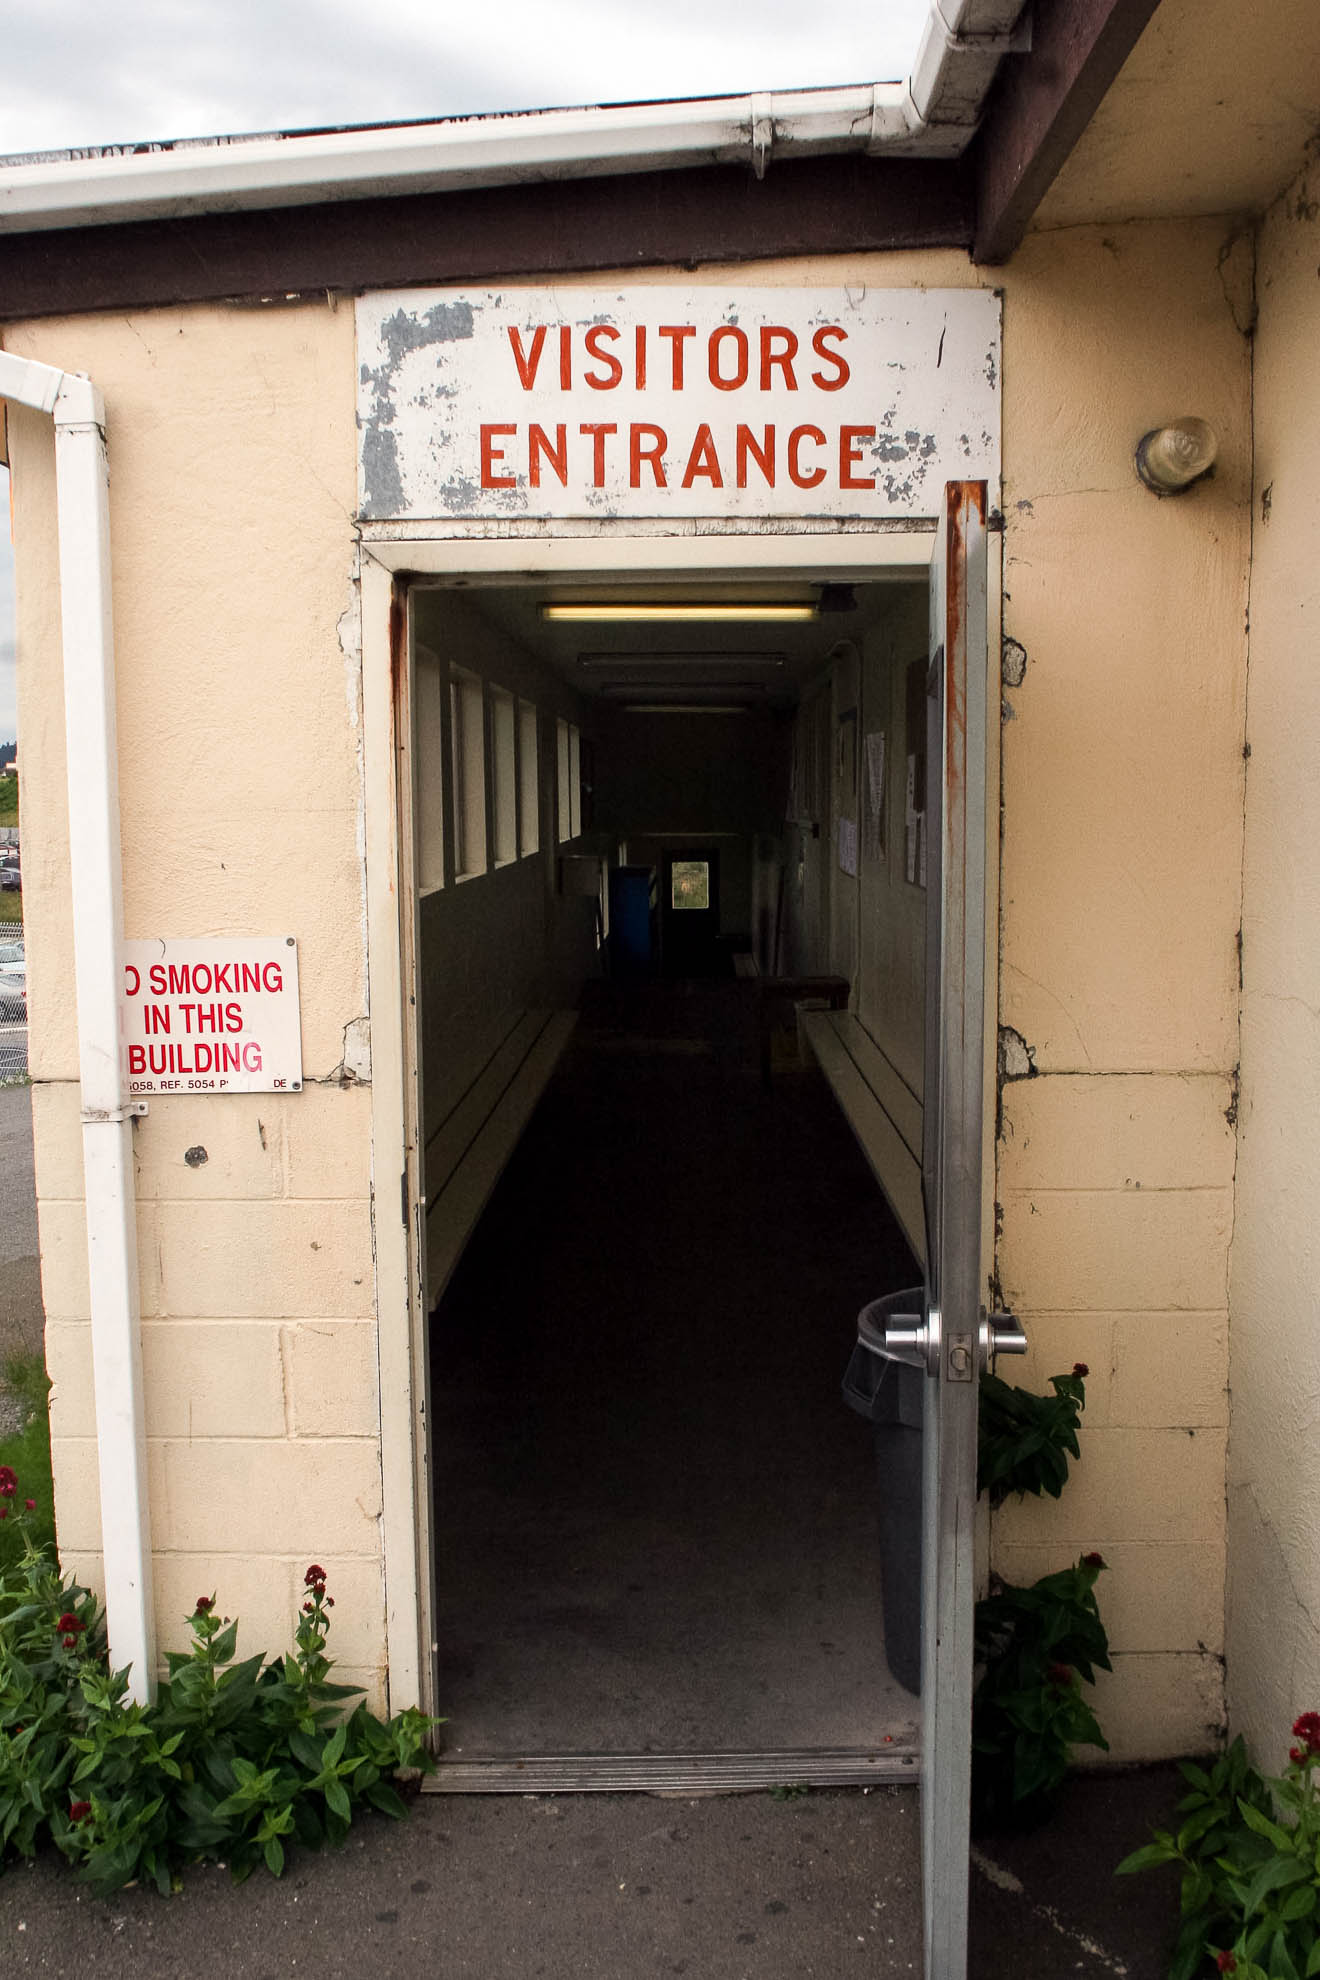 death penalty, photography, photos, execution, prison, documentary, san quentin, visitor, death row